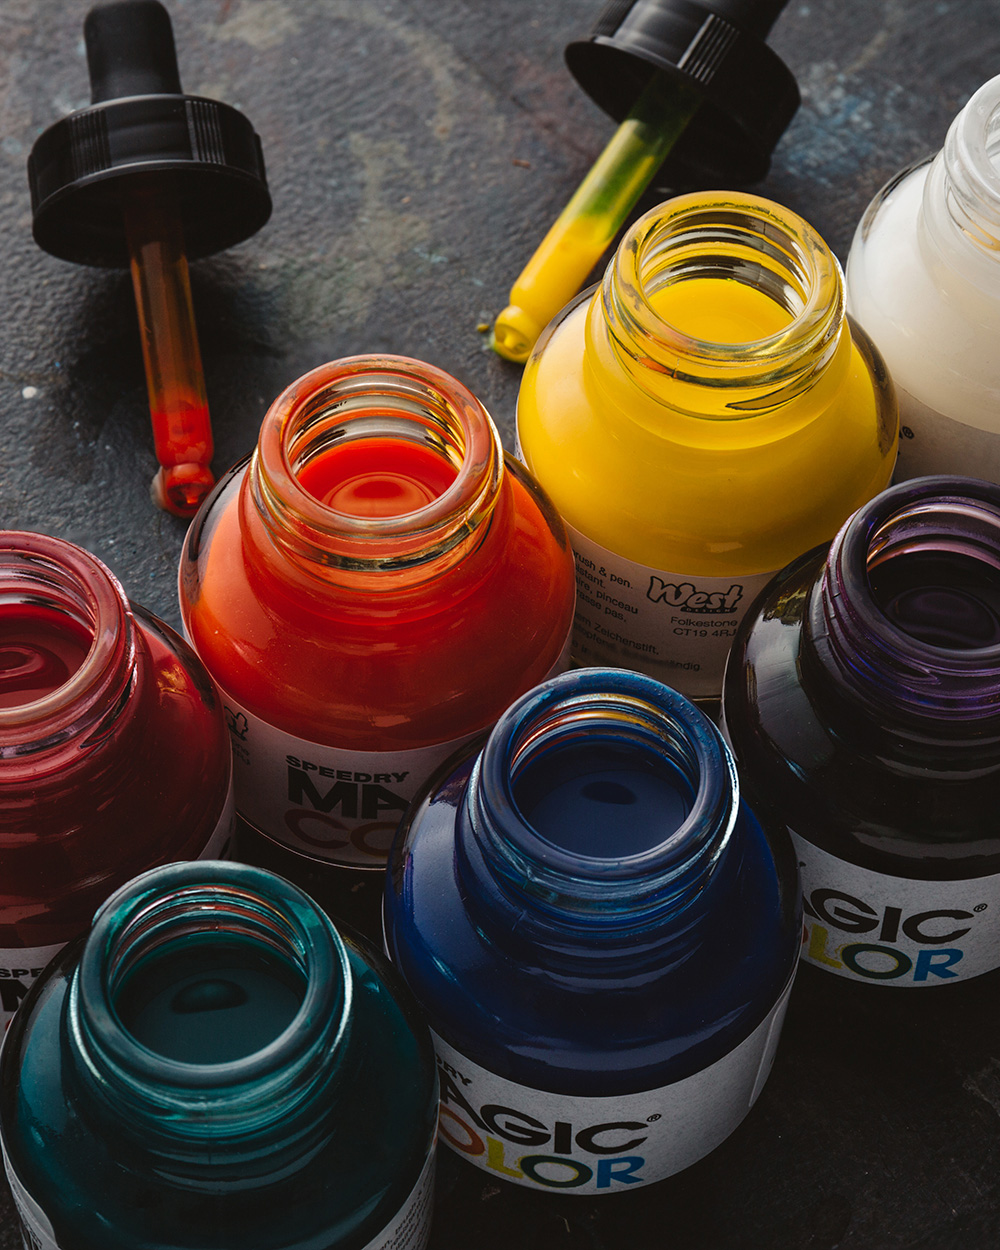 Highly saturated fluid acrylic colour that can be used with airbrushes, dip pens, and with a brush for watercolour effects.